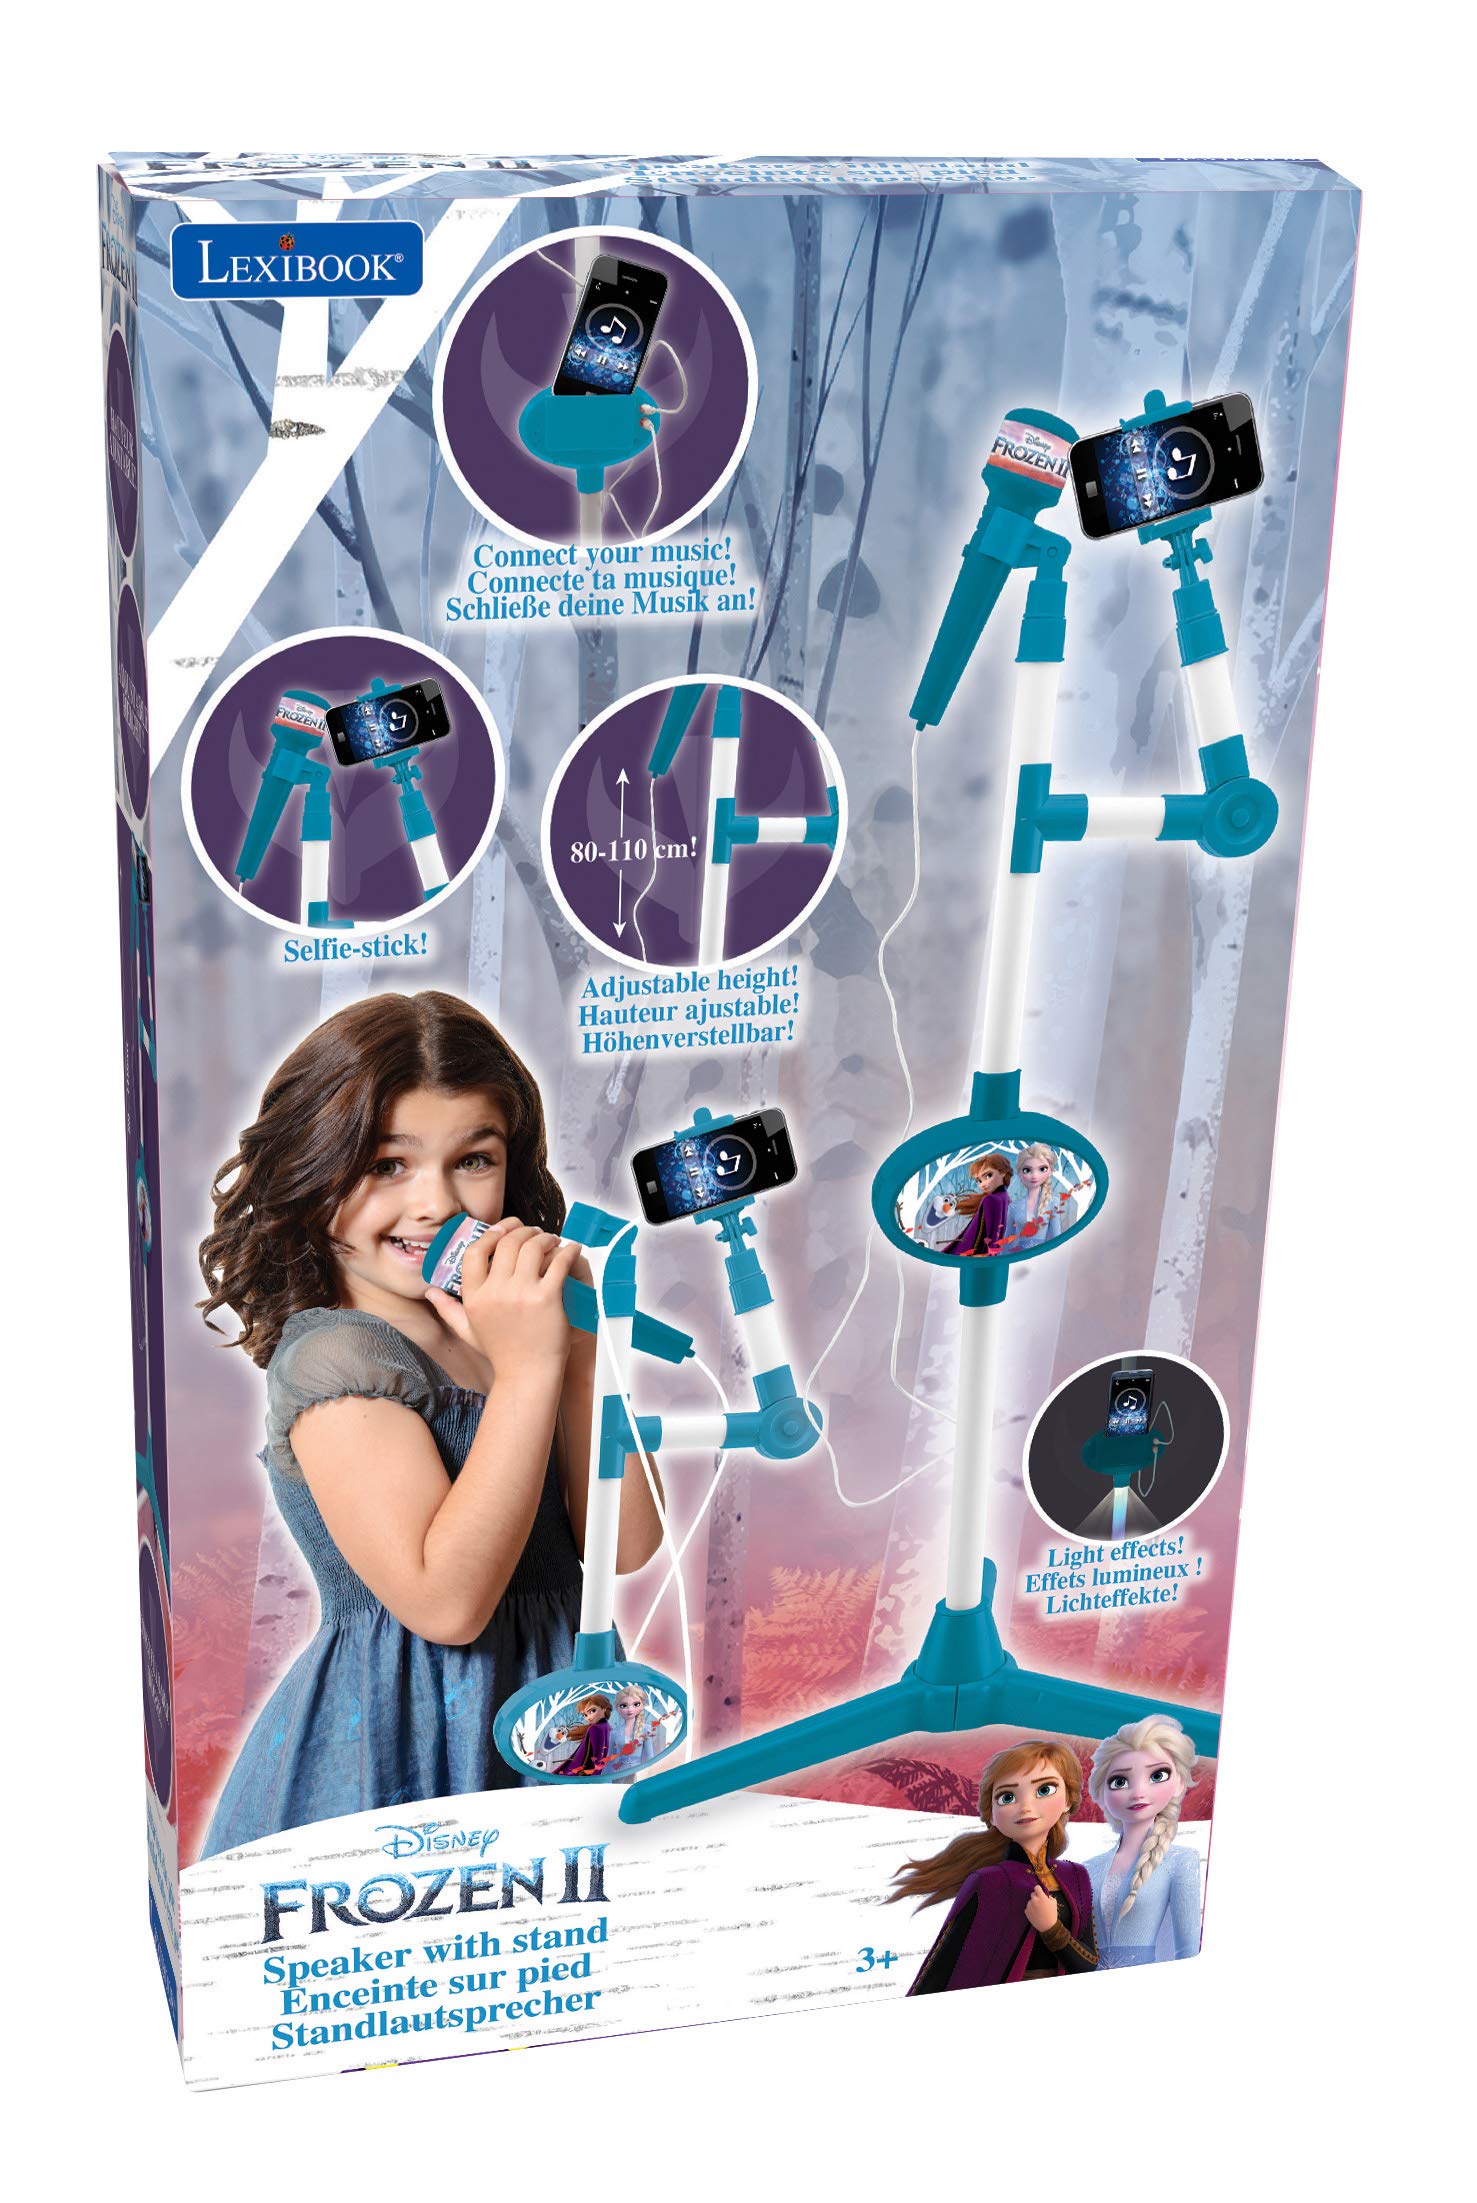 LEXiBOOK S150FZ_50 Disney Frozen 2 Elsa Anna Olaf Microphone with Speaker and Lighting Stand, Auxiliary Jack to Connect Music, Blue/Purple